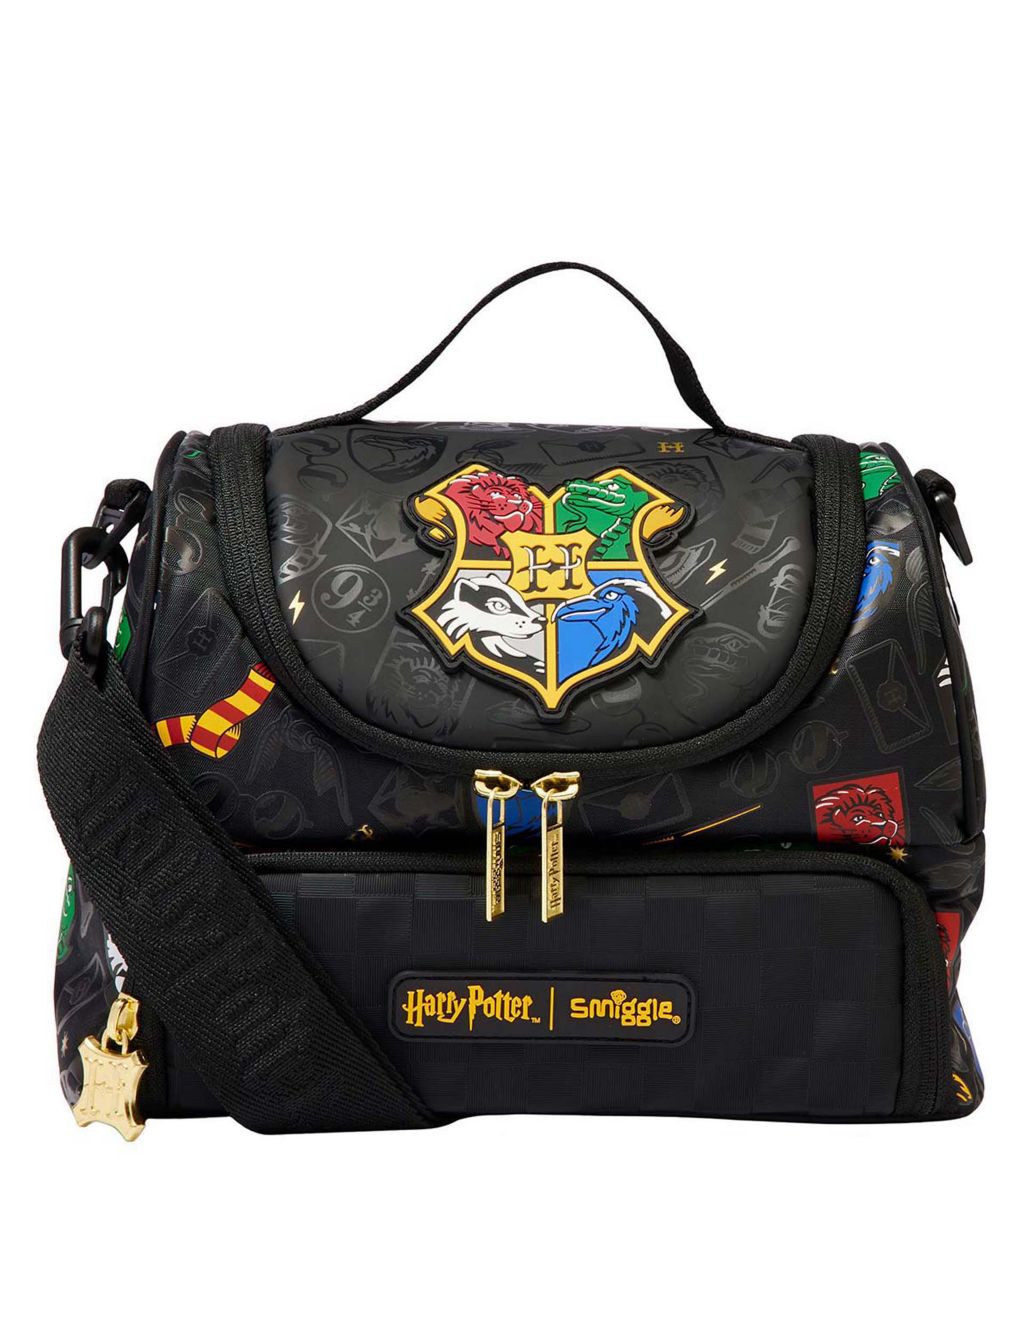 Harry Potter™ Lunch Box image 1